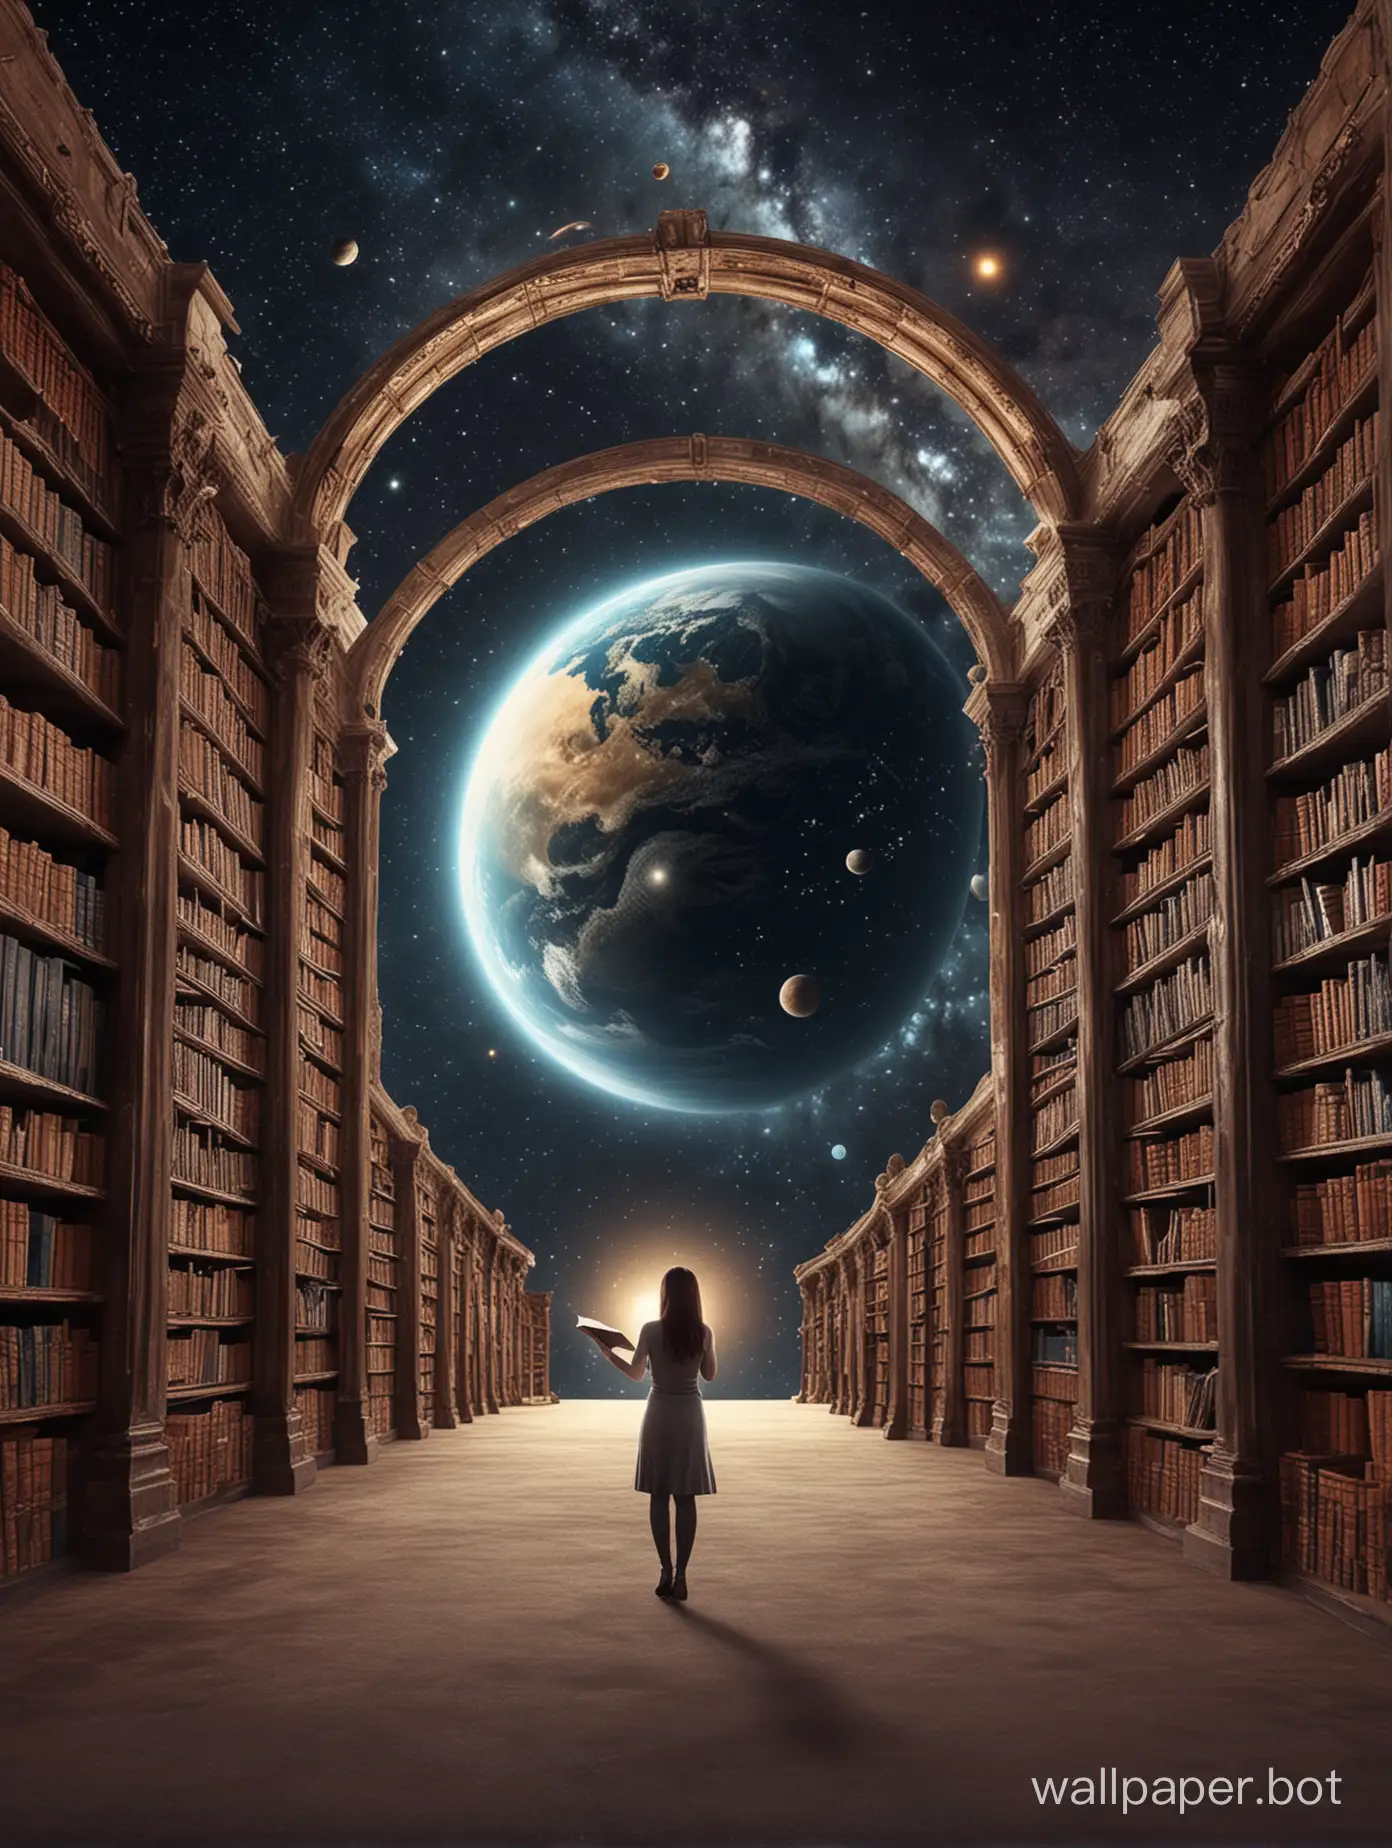 Library is planet, and books - are objects of space